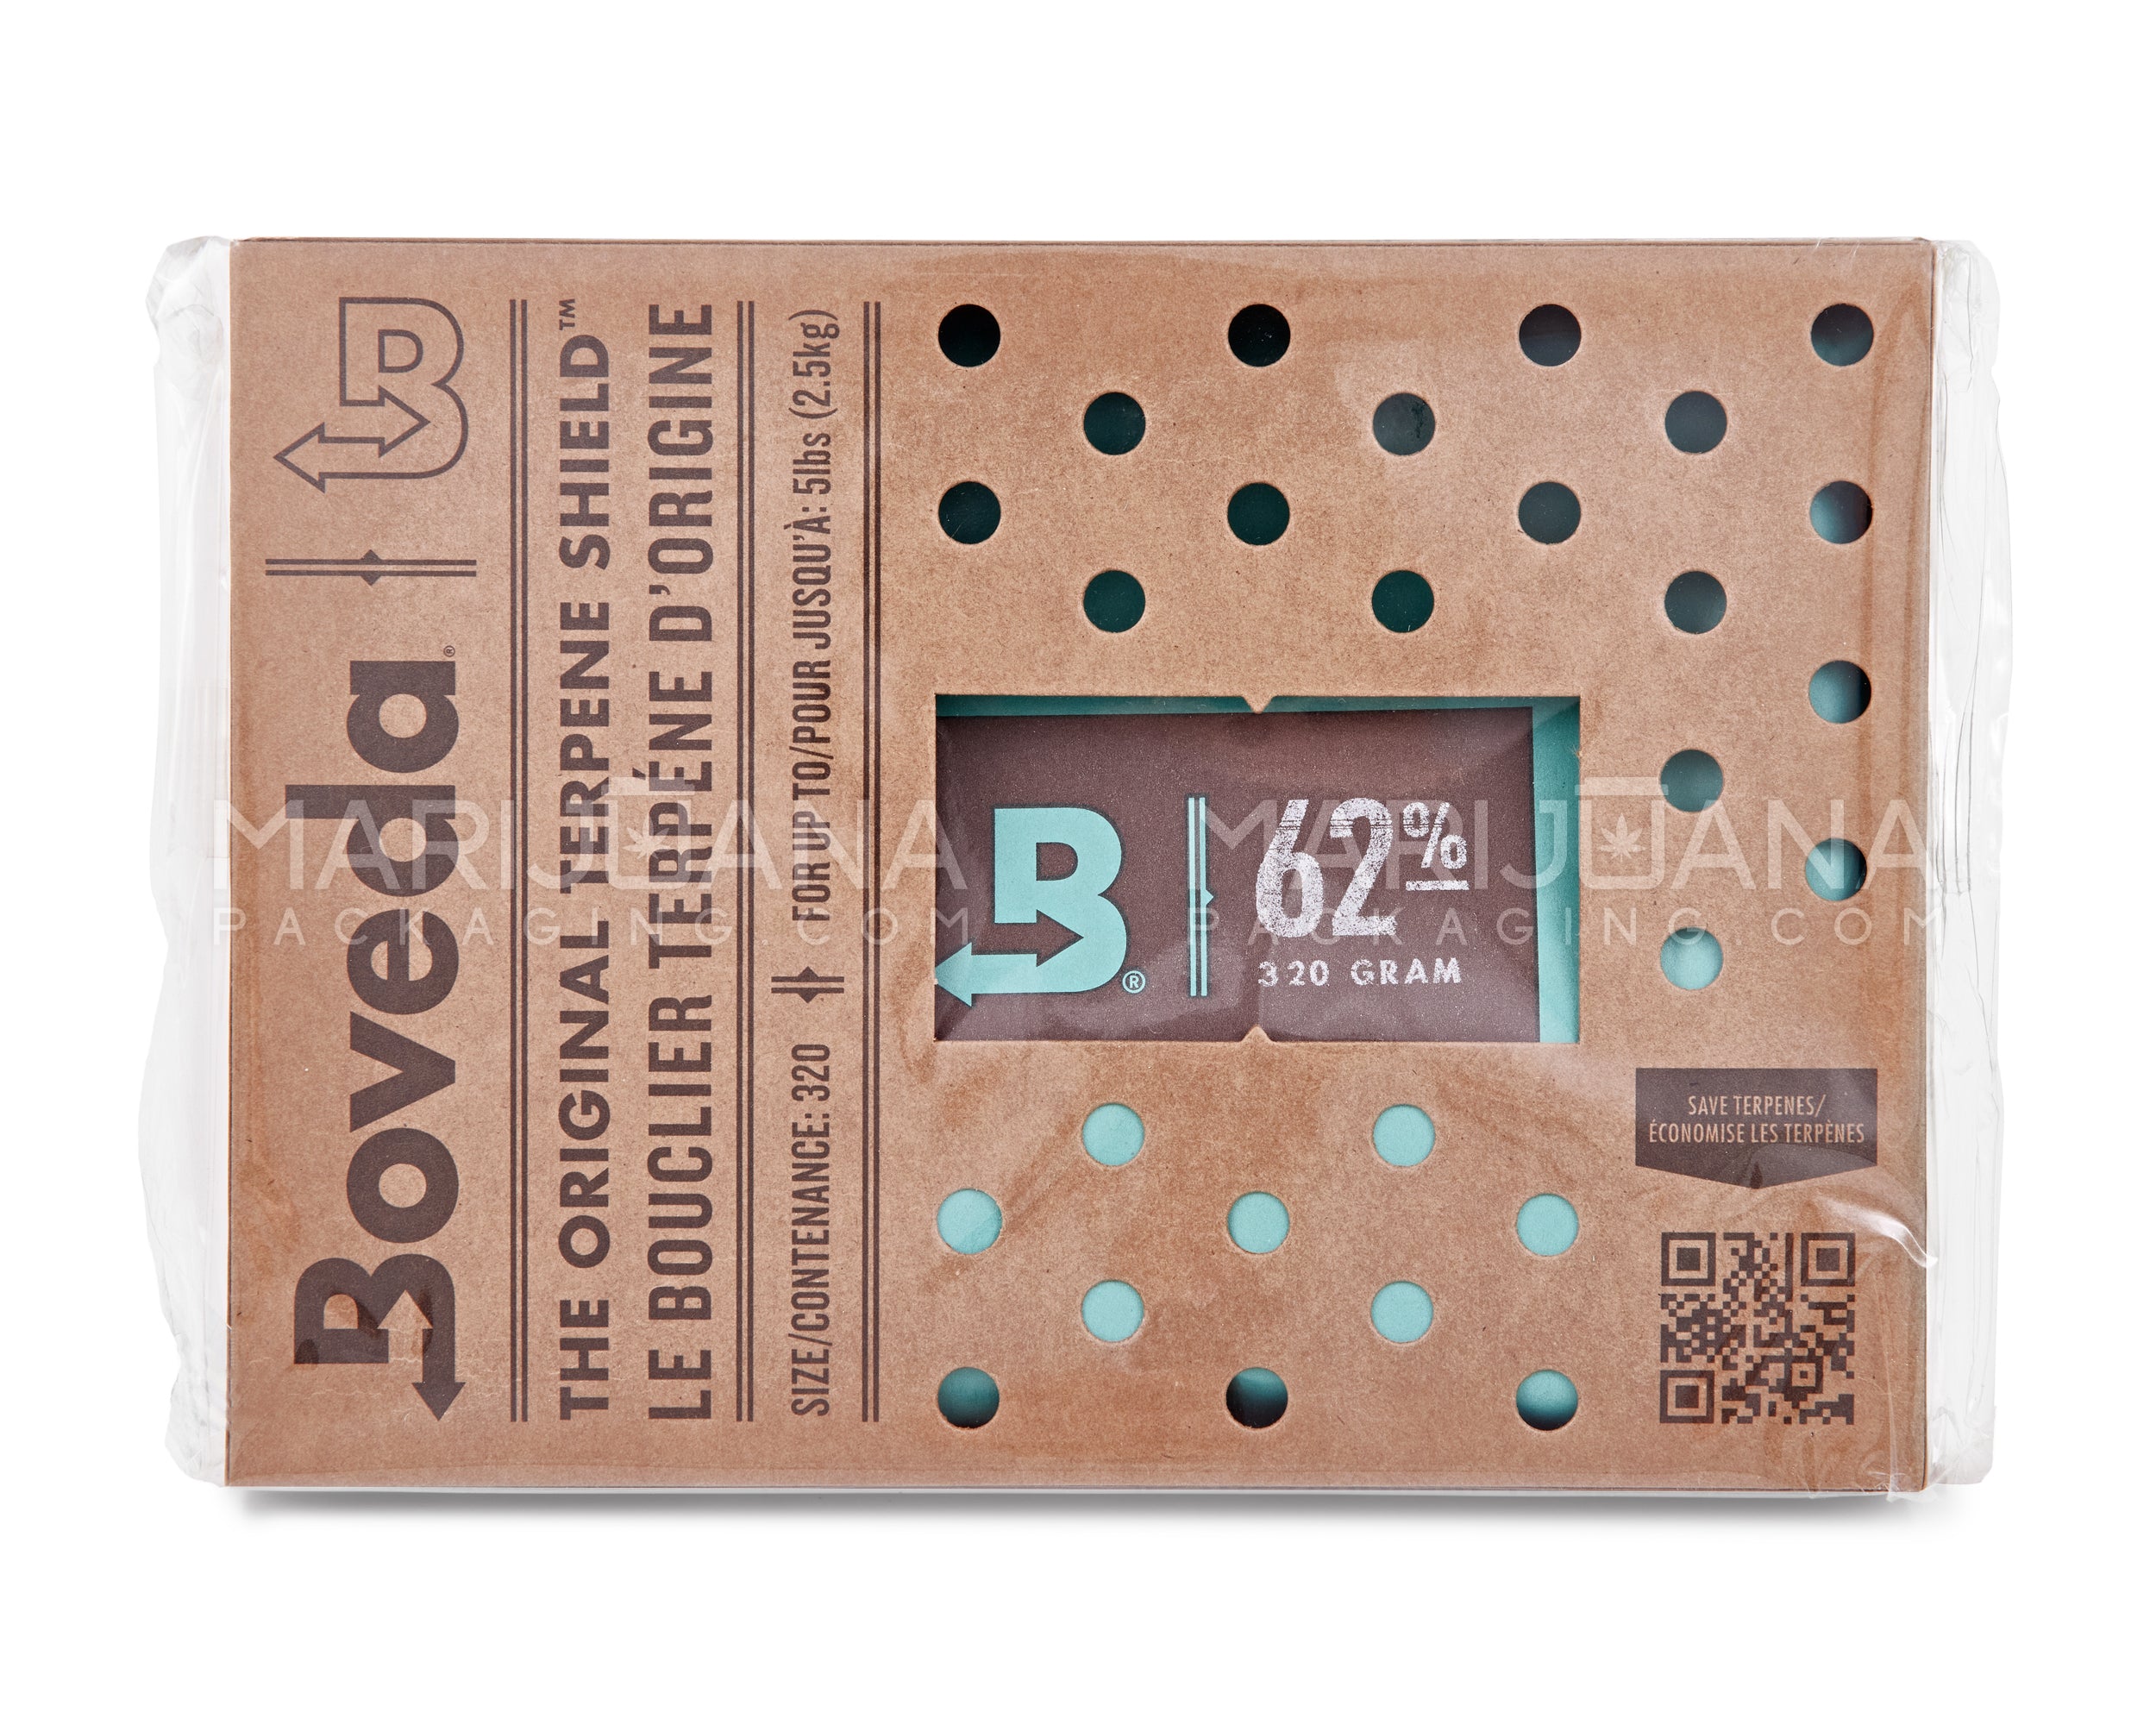 BOVEDA | Humidity Control Packs | 320 Grams - 62% - 6 Count - 3